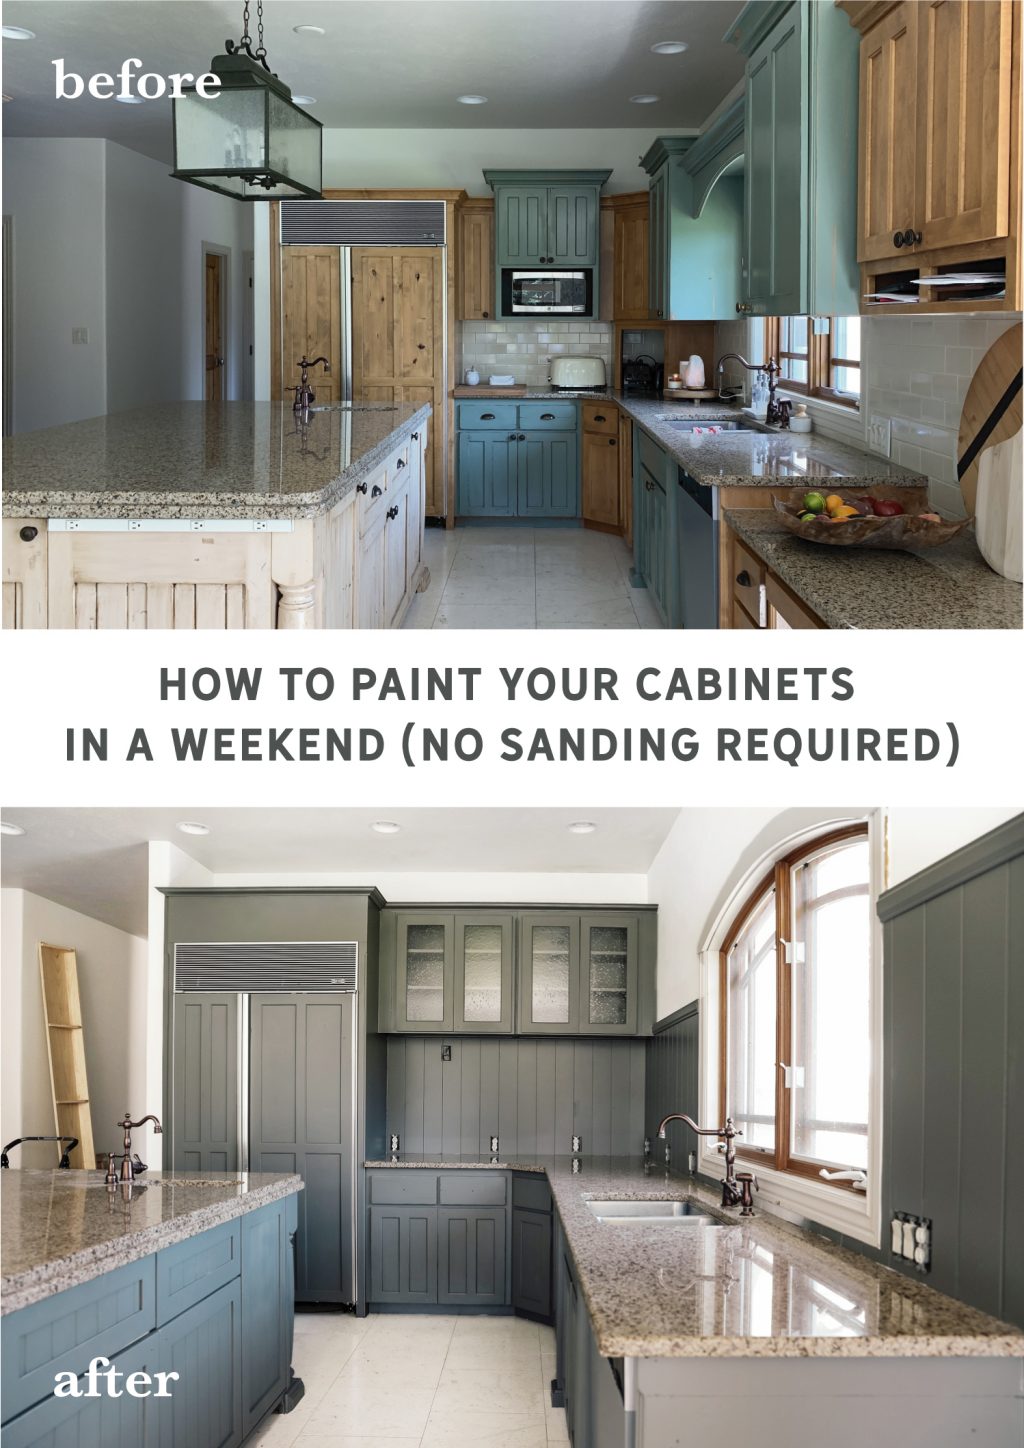 How To Paint Your Cabinets In A Weekend Without Sanding Them Chris Loves Julia,Target Dollar Section